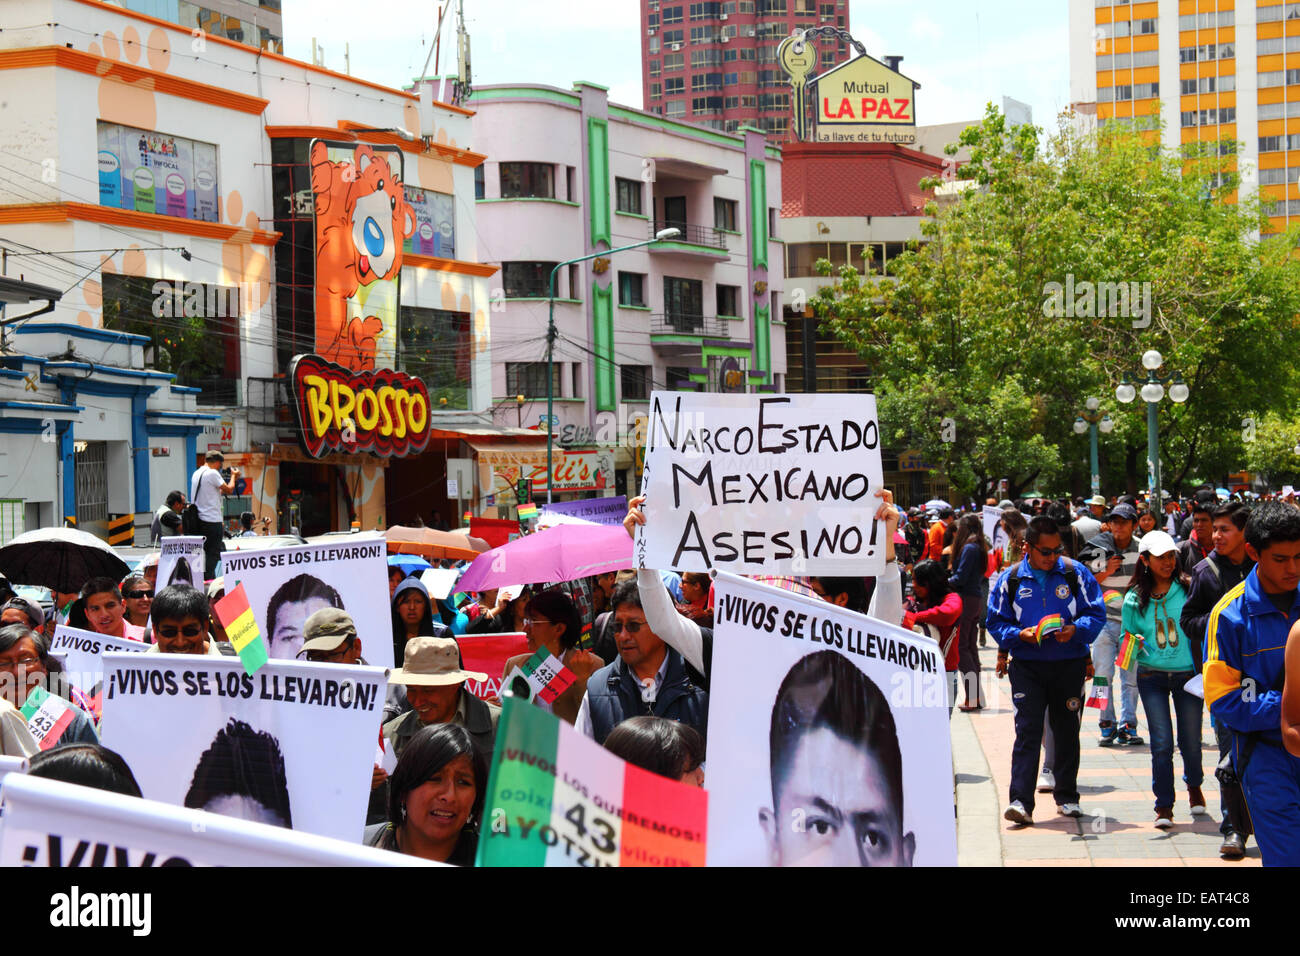 La Paz, Bolivia. 20th November, 2014. Protesters march to demand justice for the 43 missing students in Mexico and protest against the Mexican government's handling of the case and corruption. One placard accuses the Mexican government of being a narco state. Today has been designated a Global Day of Action for Ayotzinapa; a national strike is planned in Mexico and many protests are taking place worldwide. The students (who were from a teacher training college) disappeared after clashing with police on the night of 26th September in the town of Iguala. Credit:  James Brunker / Alamy Live News Stock Photo